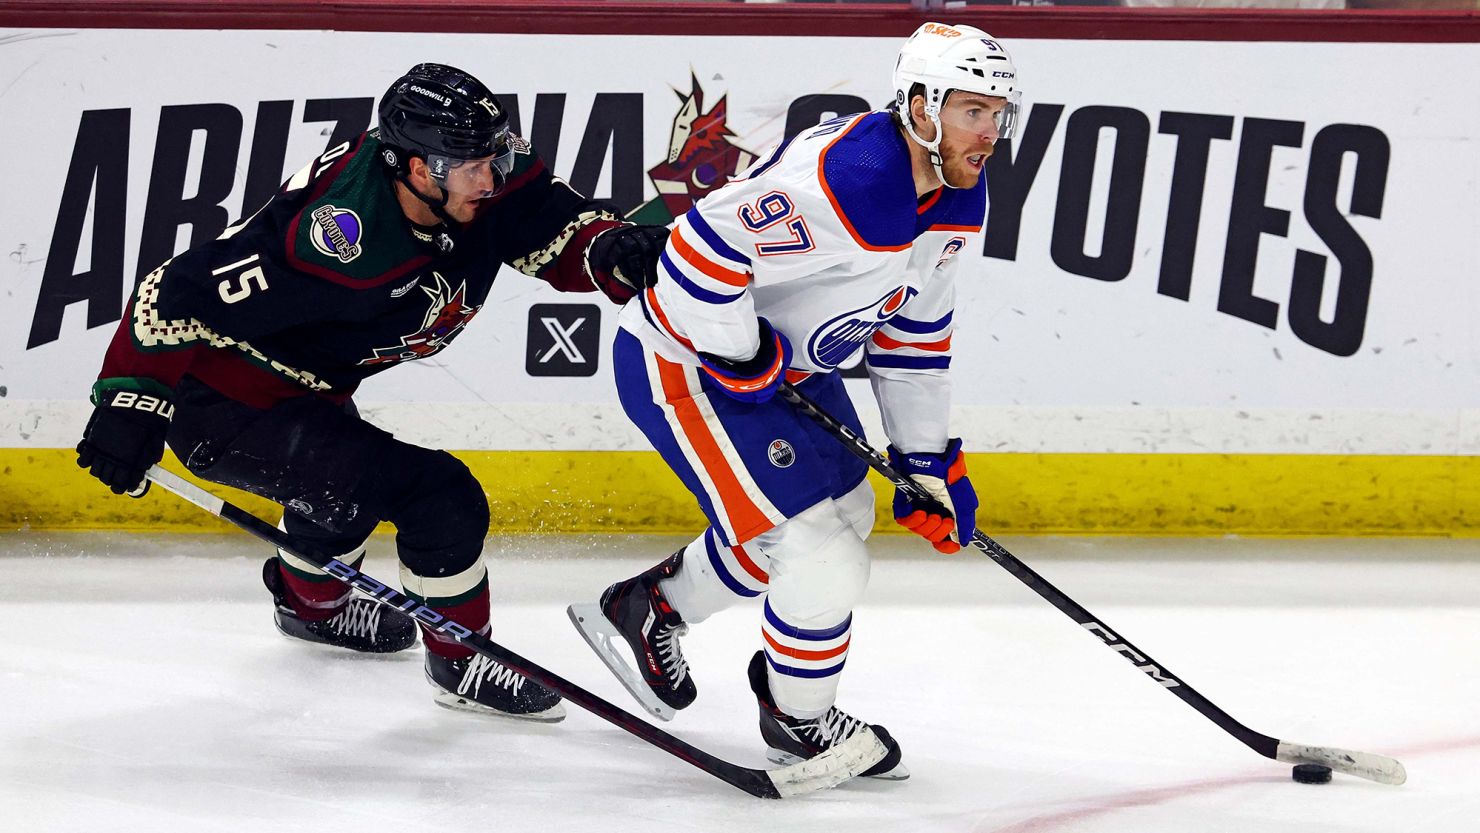 Edmonton Oilers center Connor McDavid (97) moves the puck against Arizona Coyotes center Alex Kerfoot (15) during the second period at Mullett Arena.